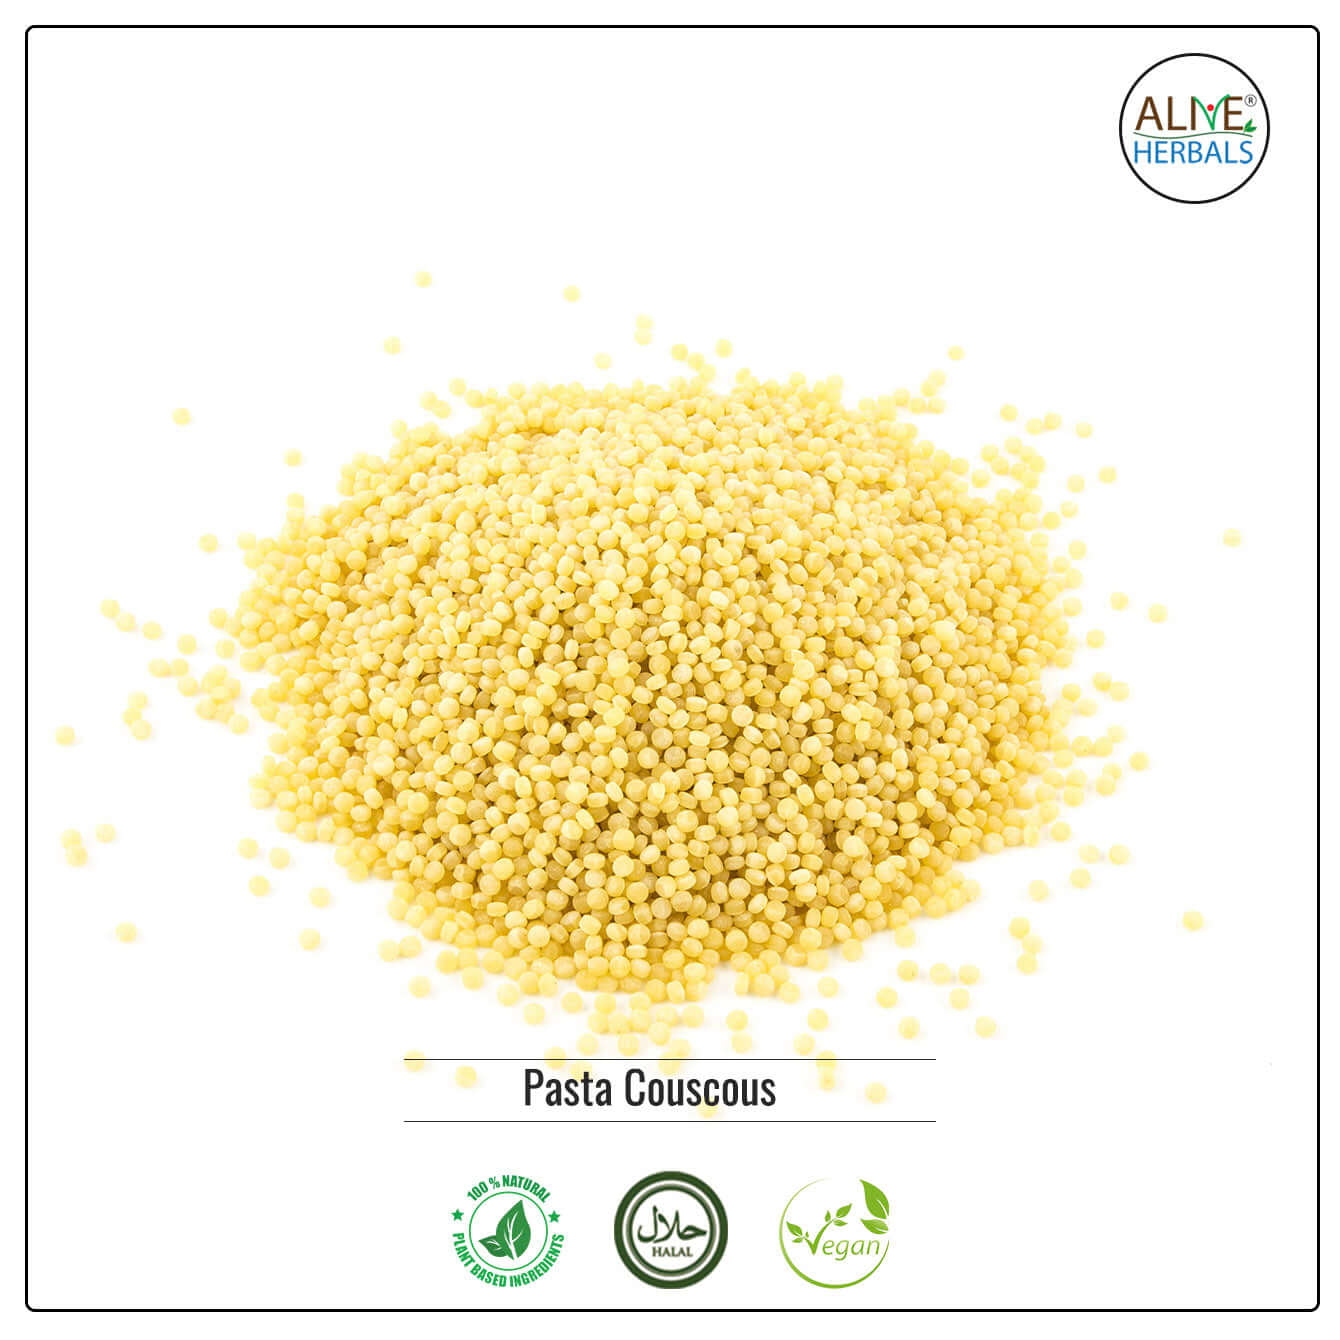 Couscous is pasta - Shop at Natural Food Store | Alive Herbals.